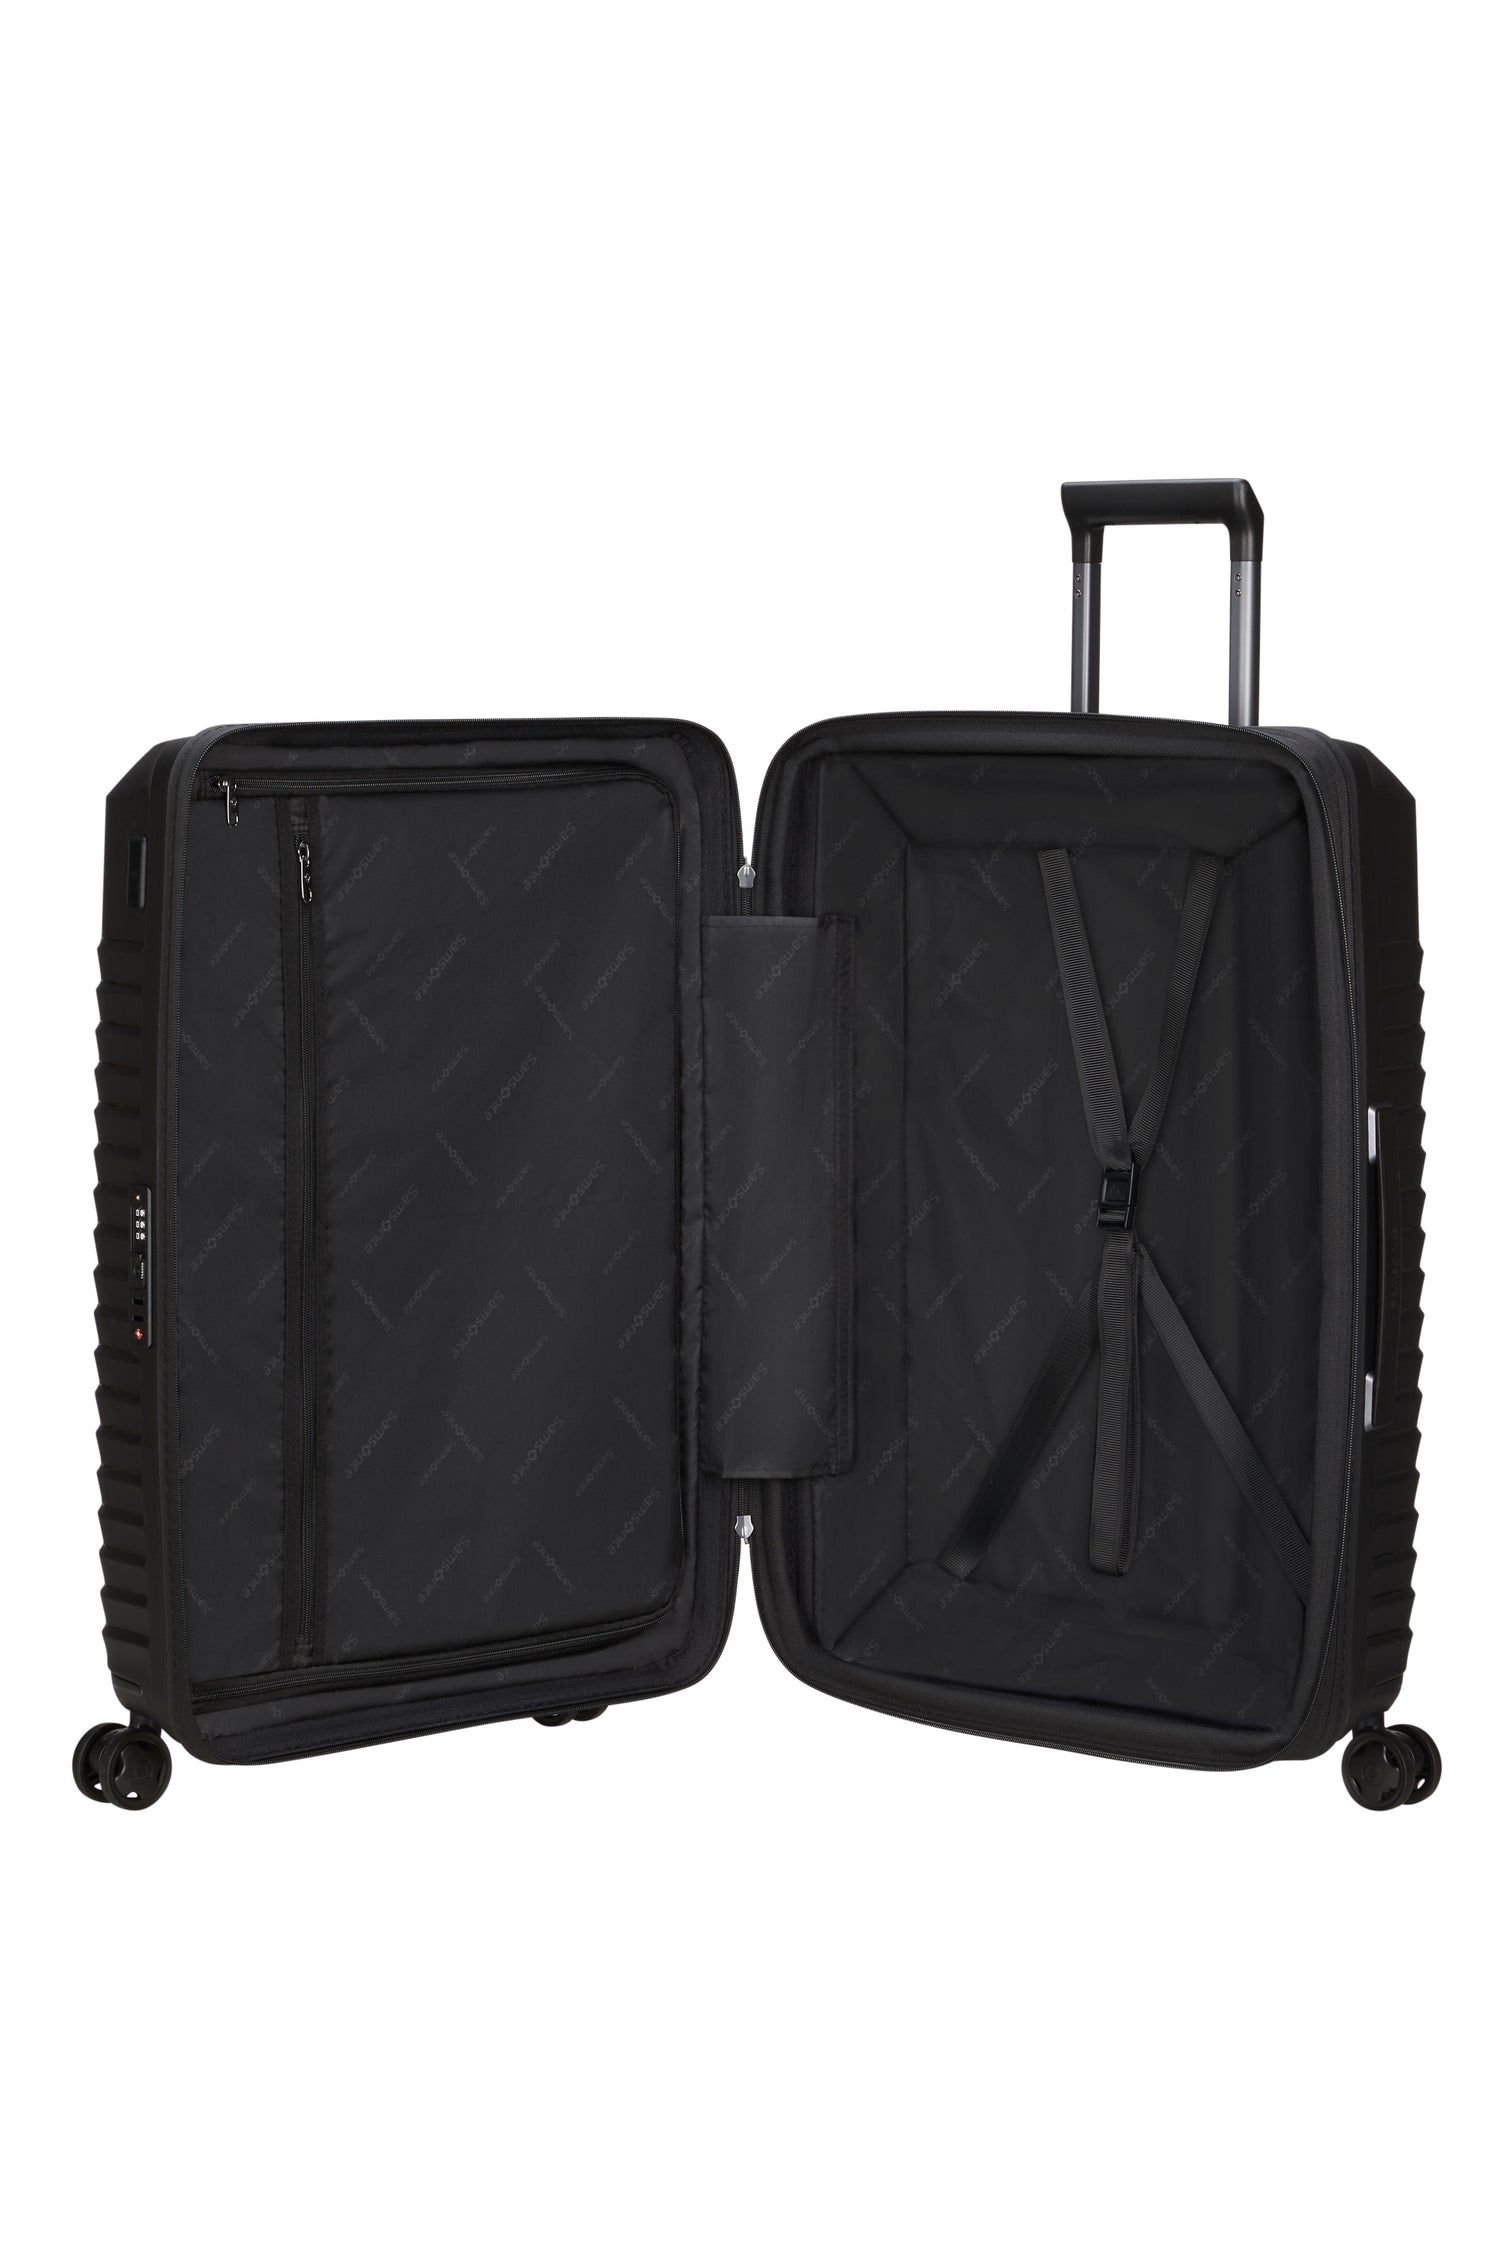 Samsonite Intuo 75cm Expandable Spinner